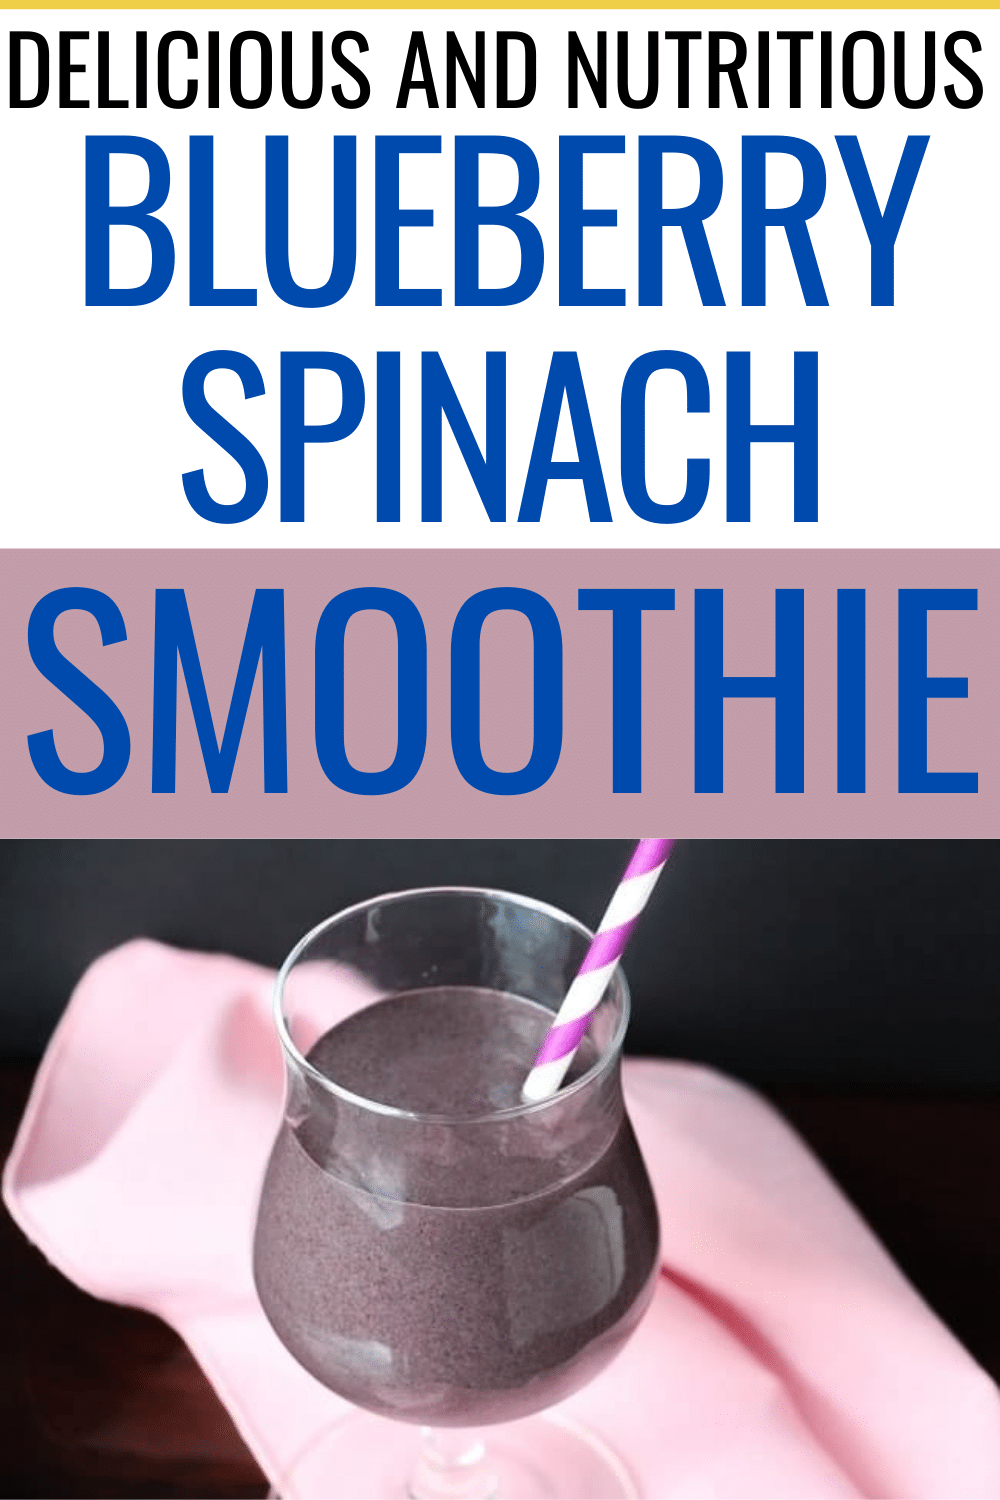 This blueberry spinach smoothie is full of superfoods. It's an easy and delicious way to load up on nutrients at any time of day. #smoothie #smoothierecipe #blueberry #spinach via @wondermomwannab